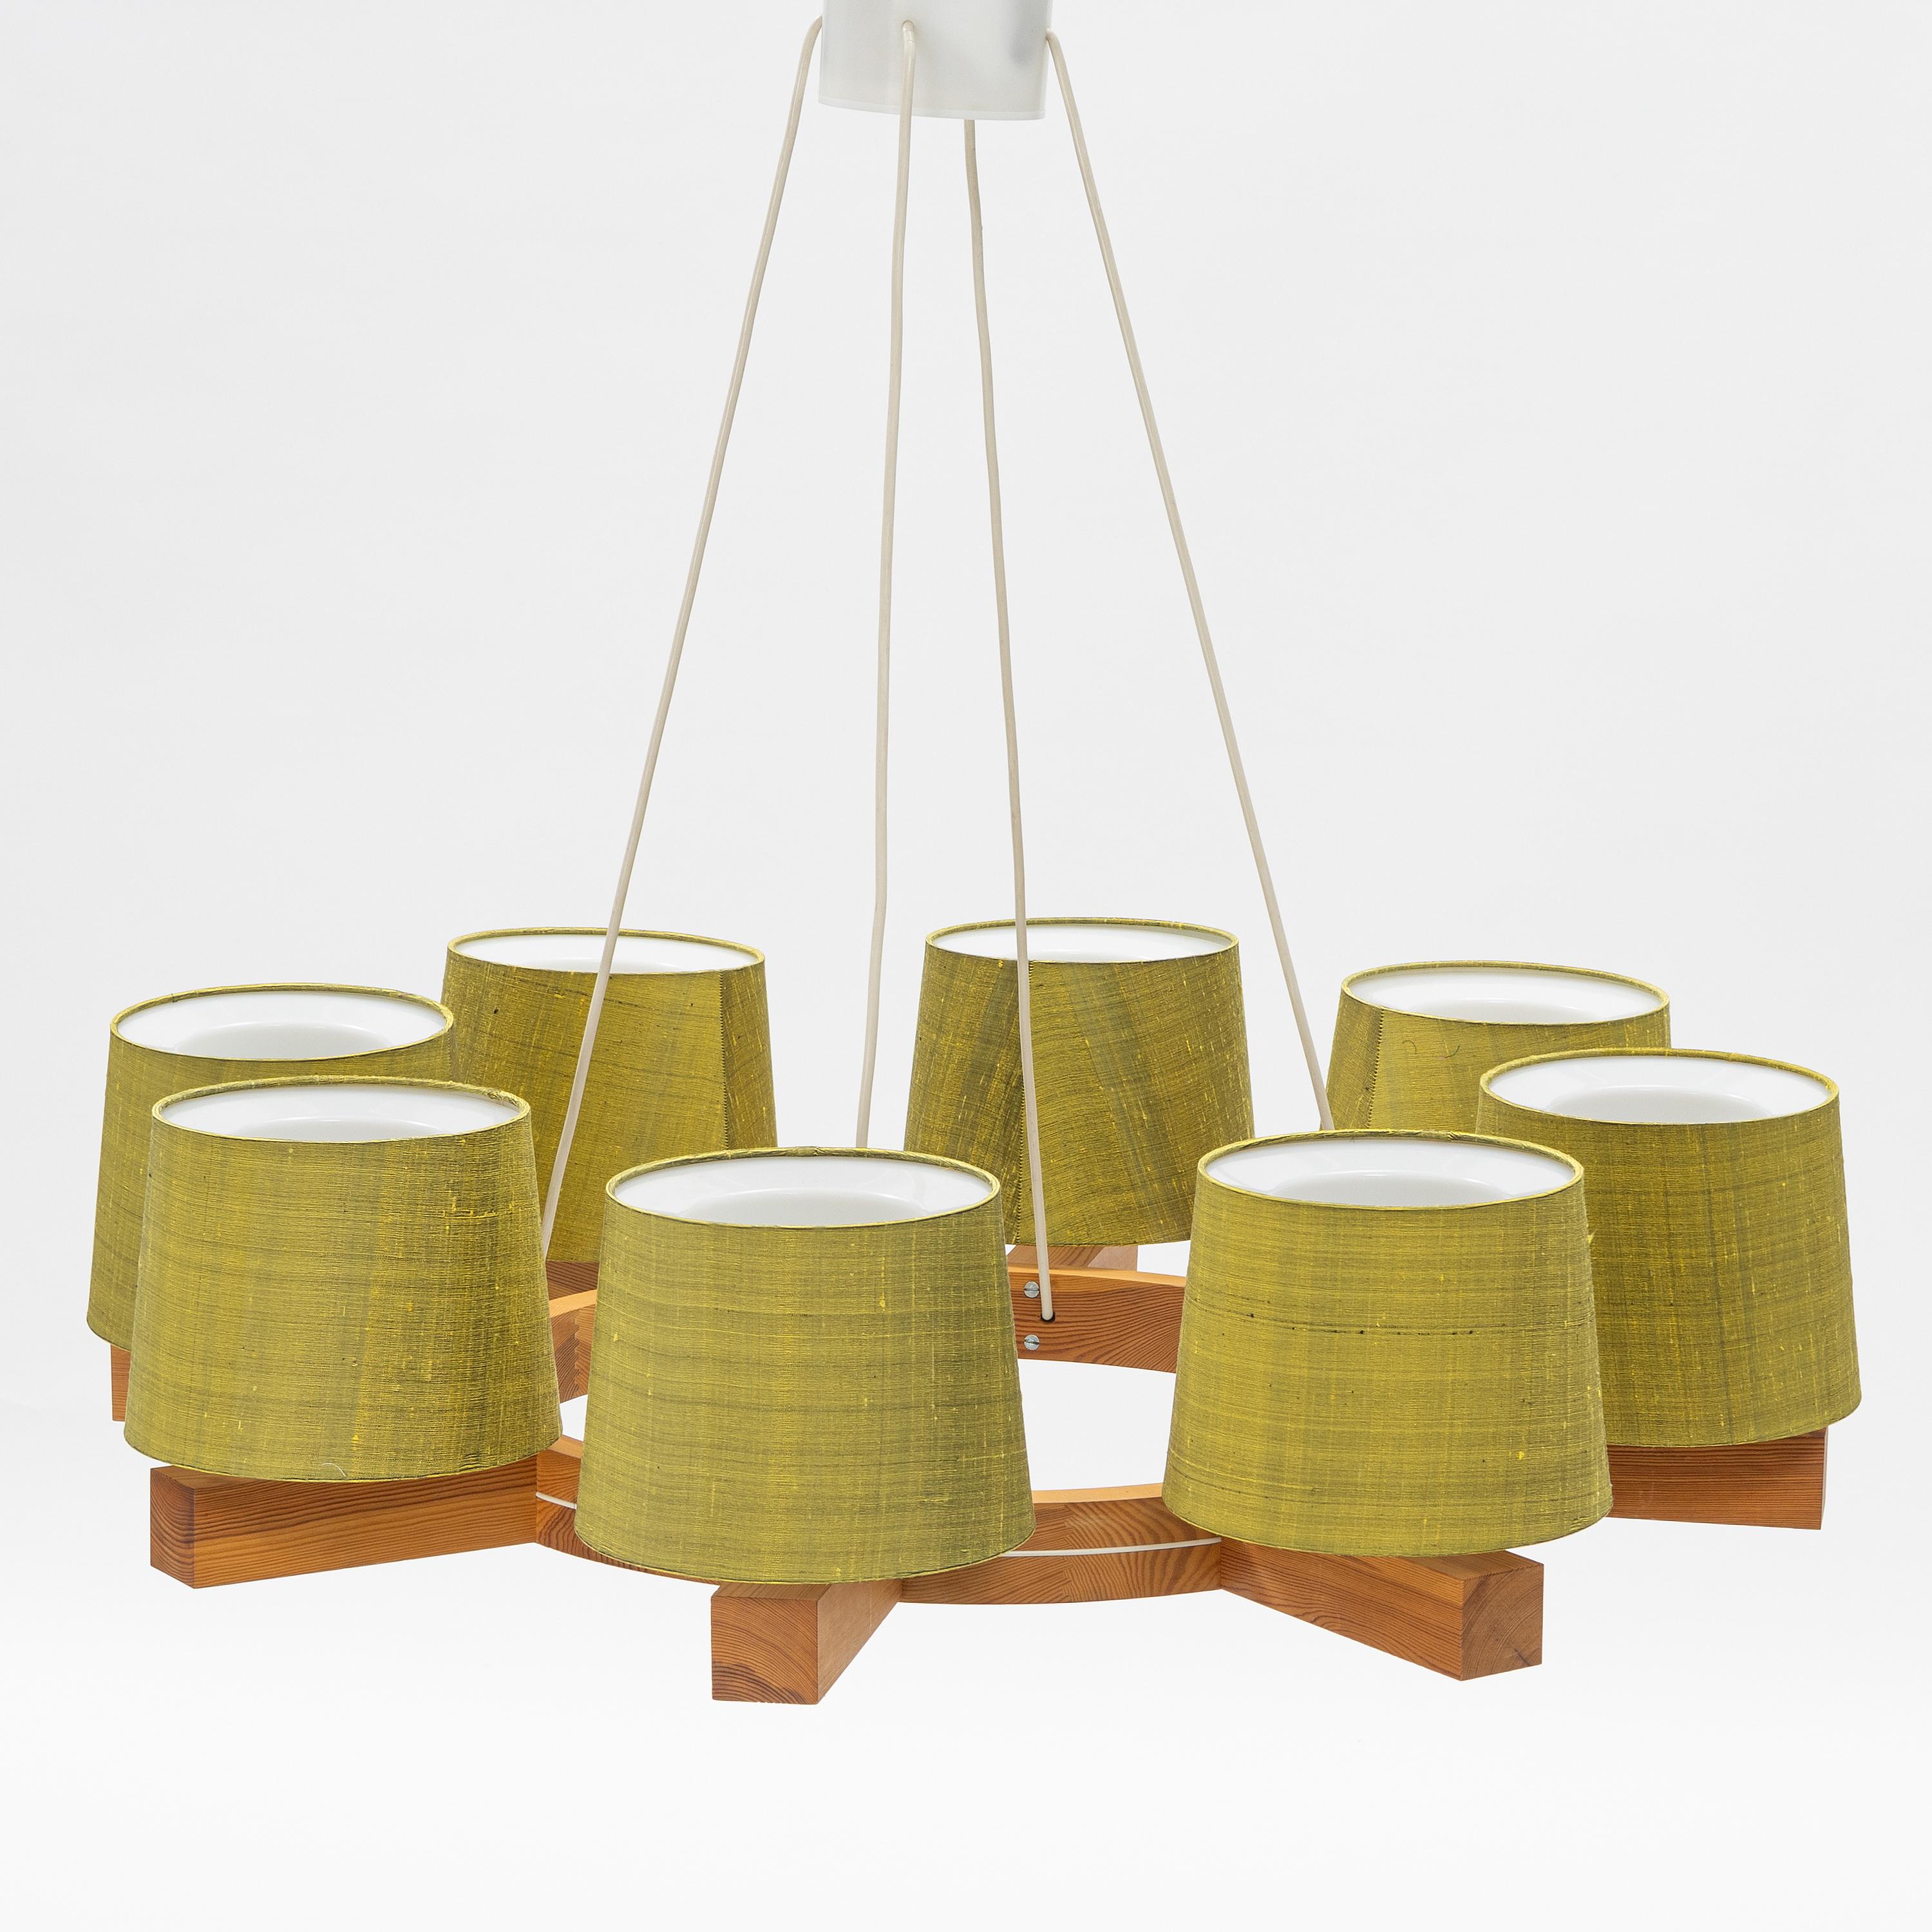 Designed by Uno & Östen Kristiansson in the 1960s in Sweden for Luxus, Vittsjö.
A pine wood ring with eight arms and yellow-green Texolux shades. 
Diameter 96, height 84 cm.